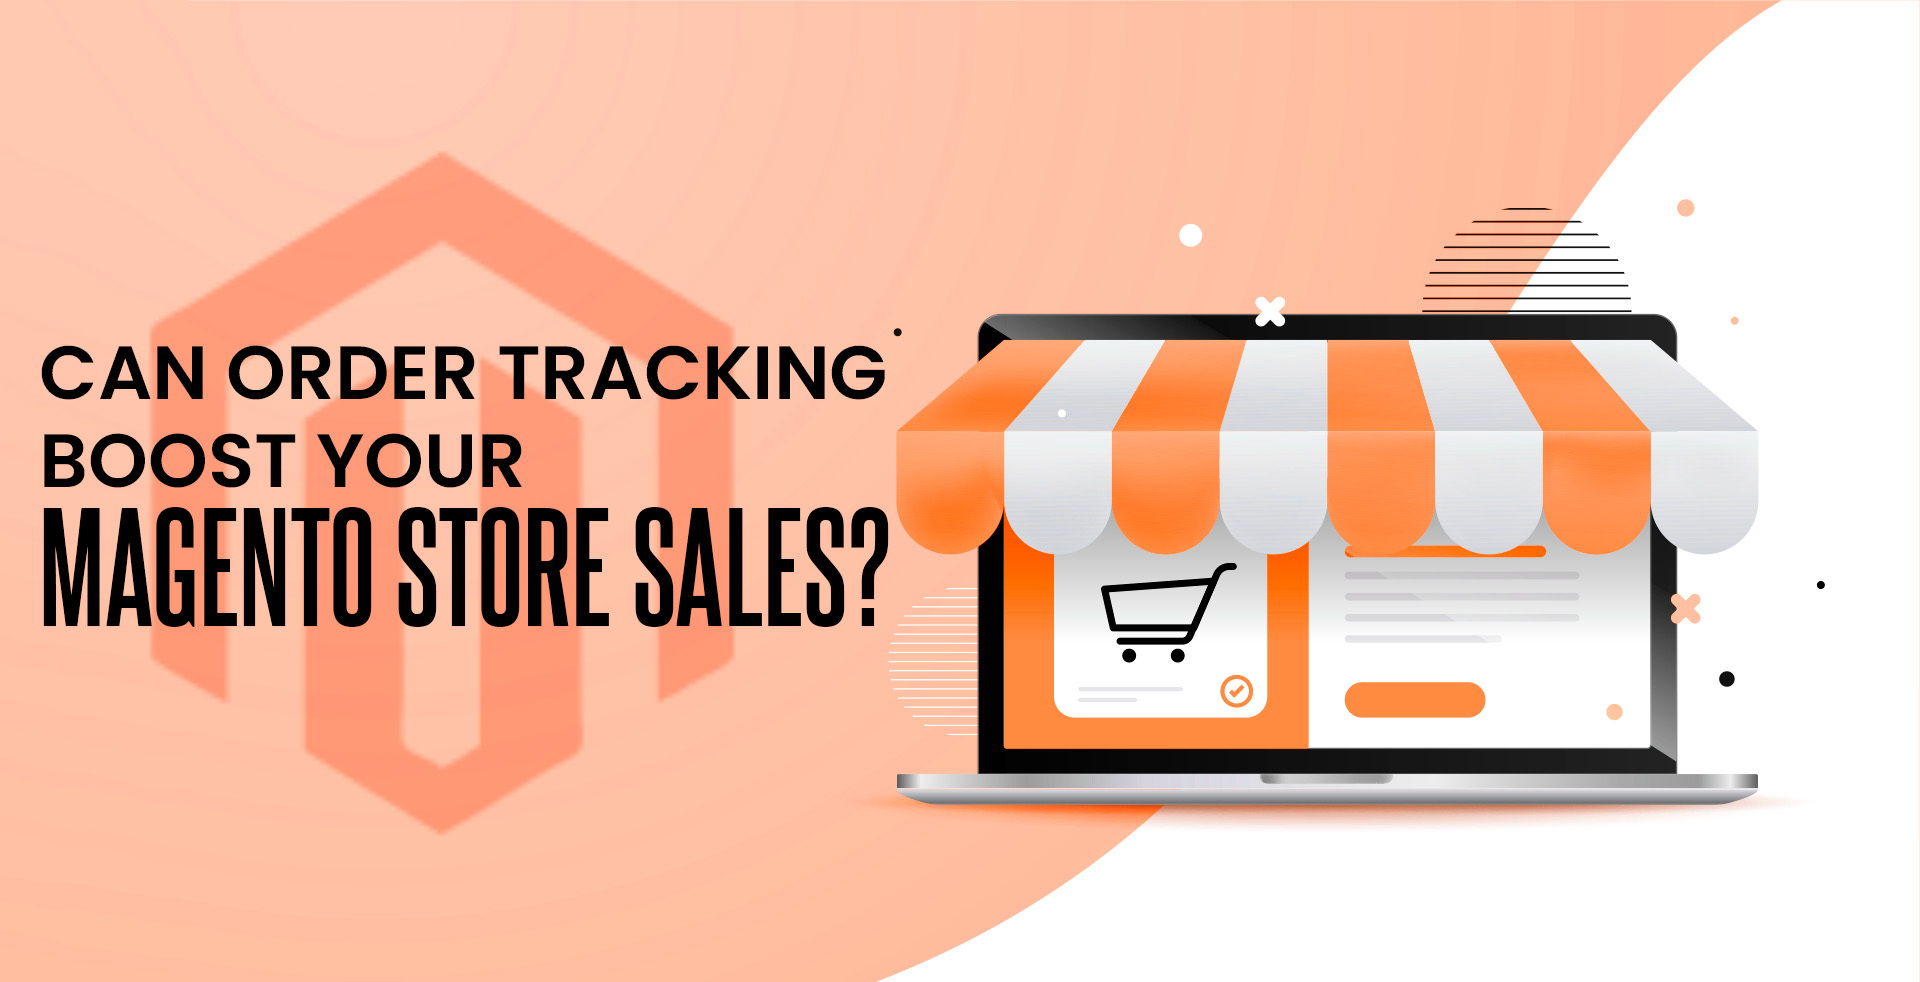 Can order tracking boost your Magento store sales? 